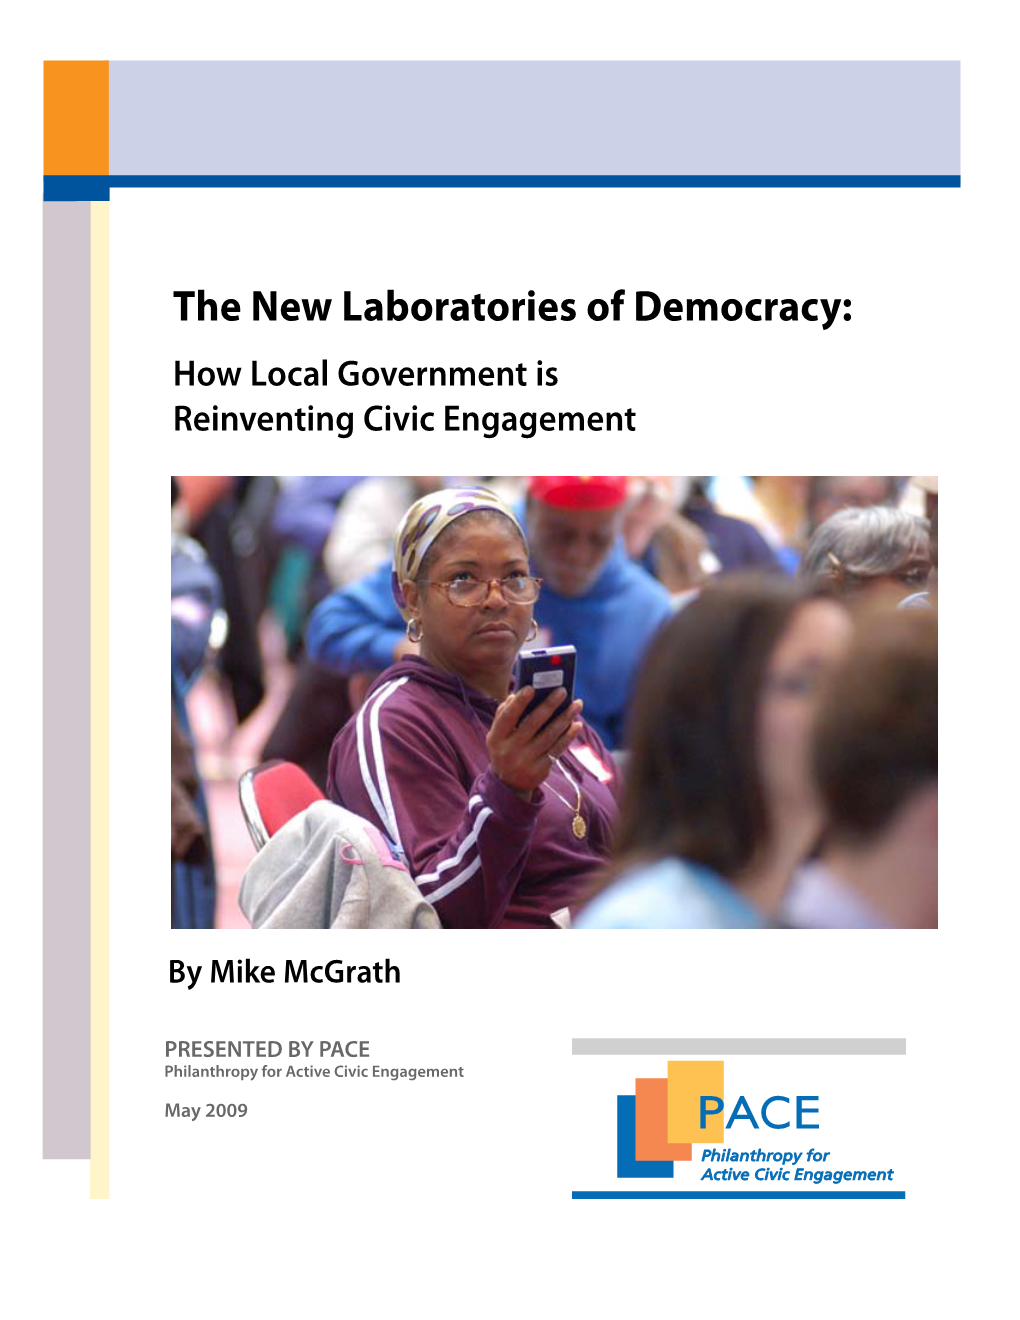 The New Laboratories of Democracy: How Local Government Is Reinventing Civic Engagement